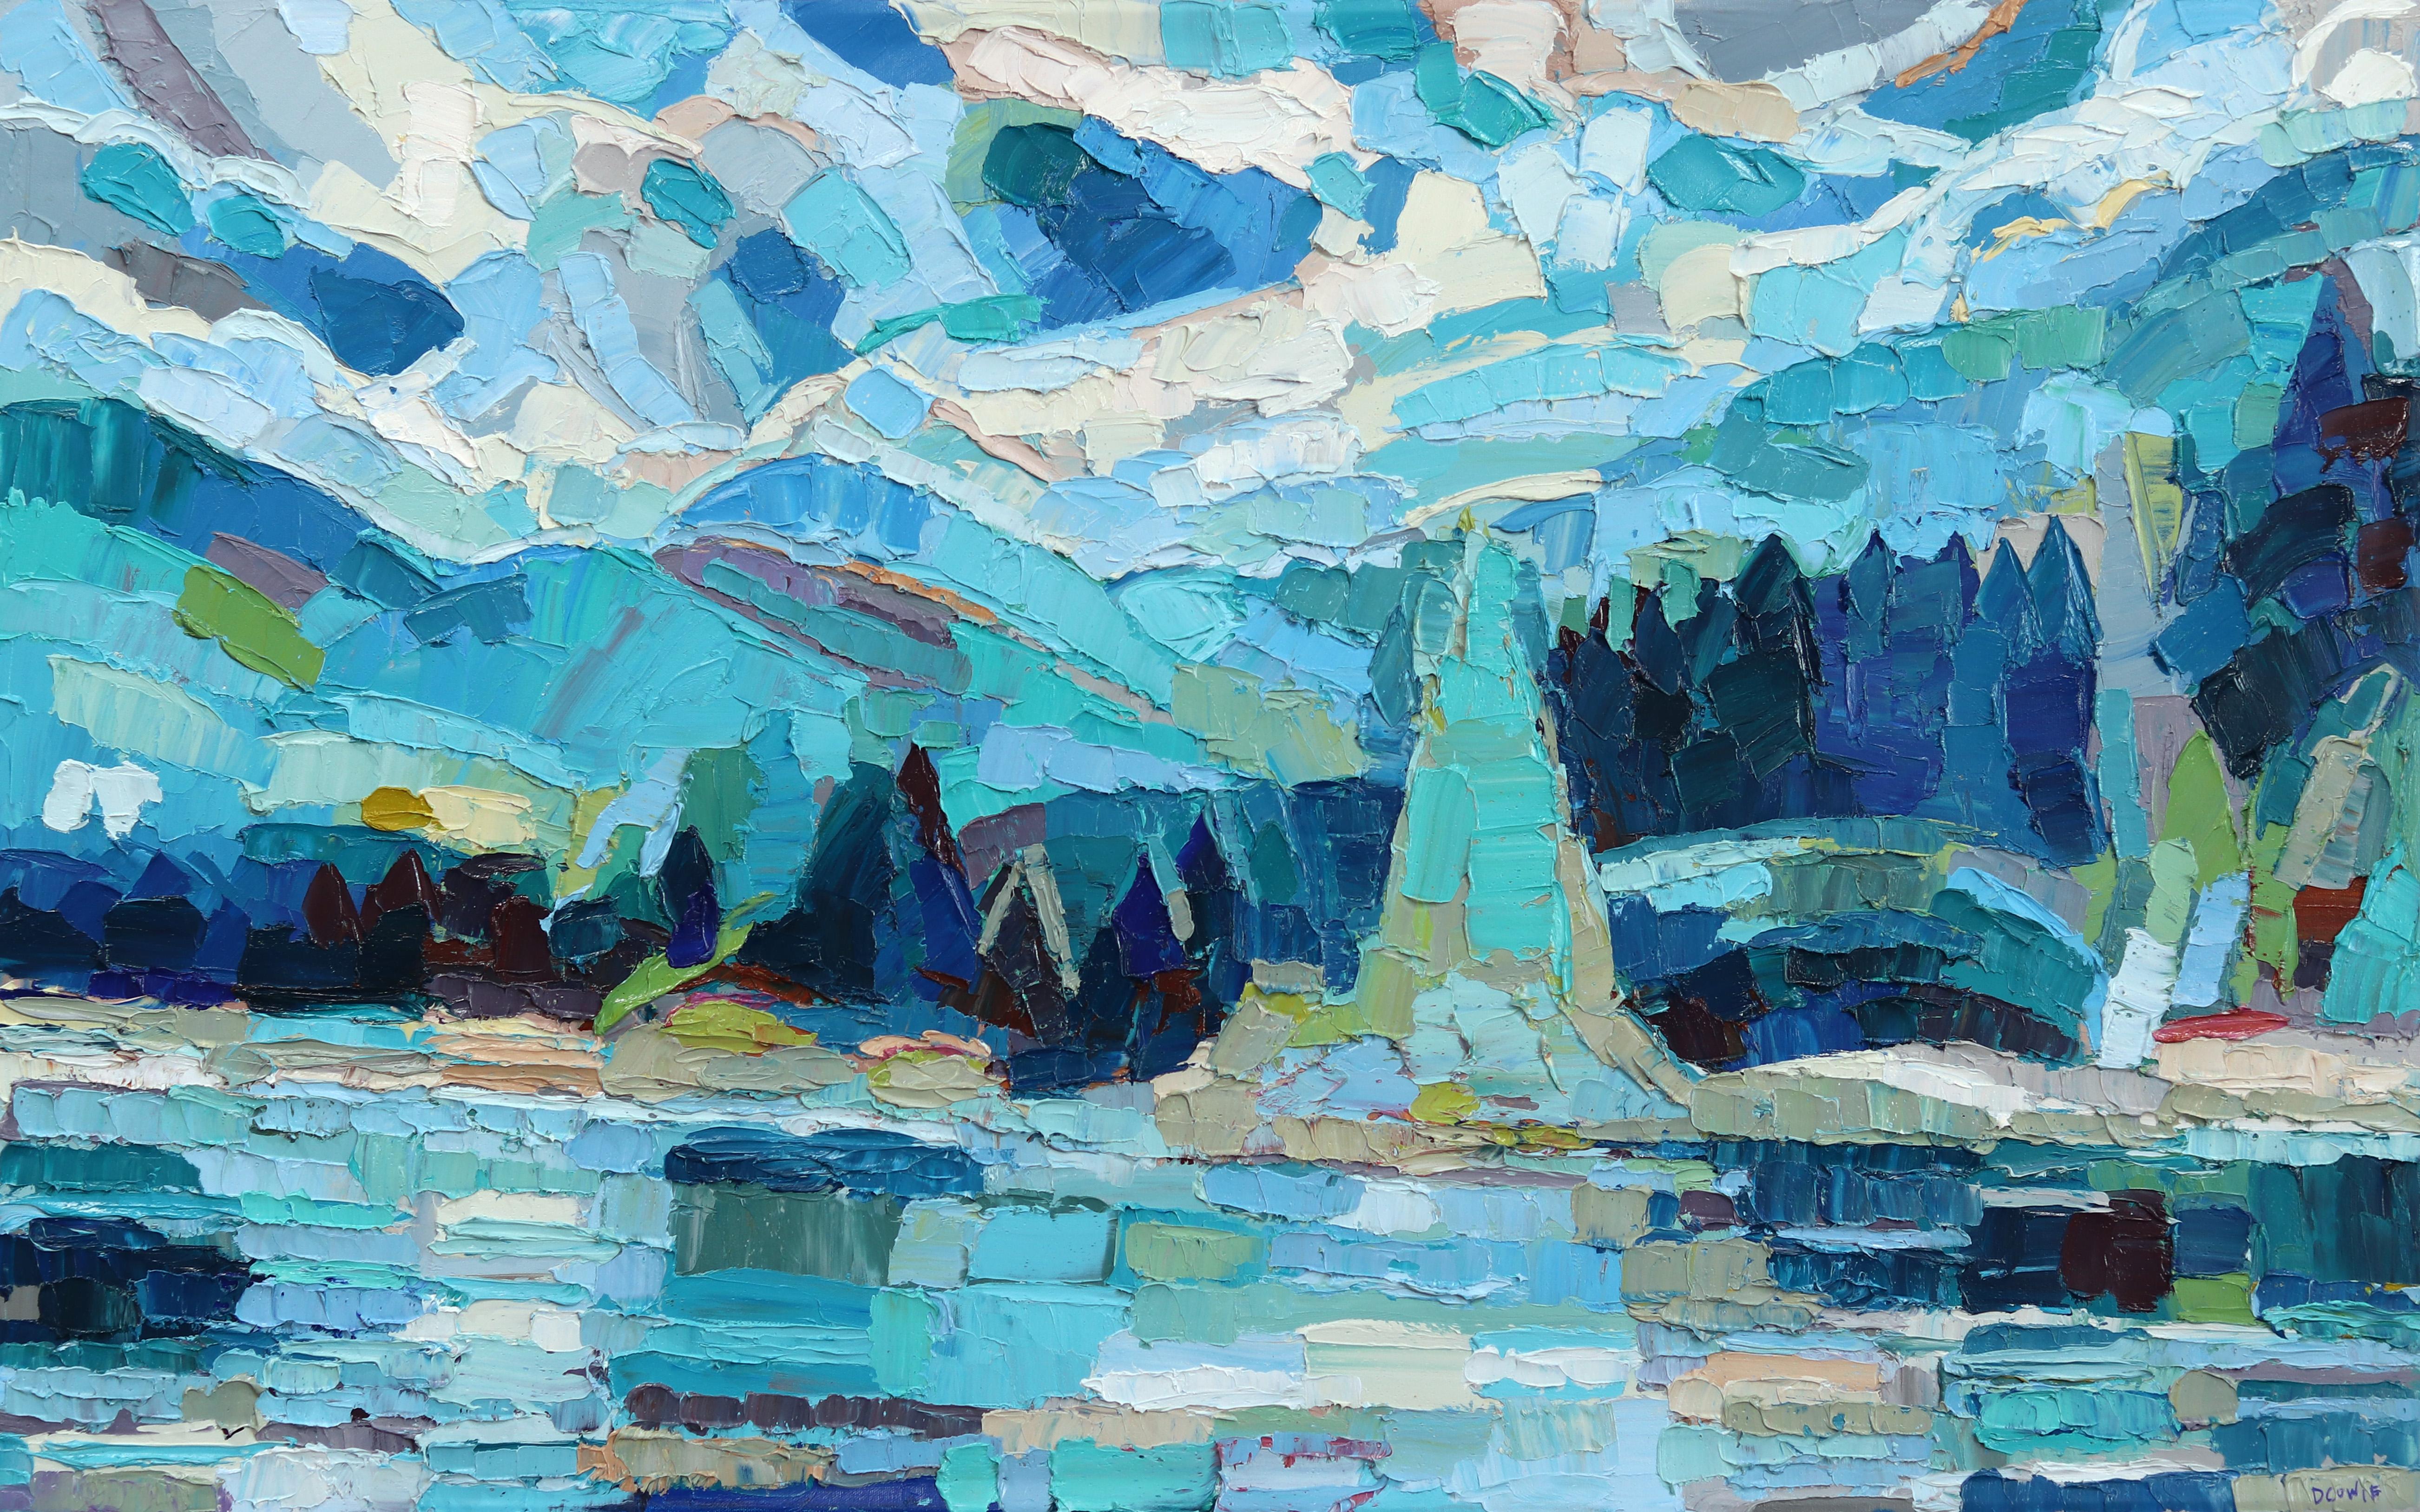 Using an impasto, painterly technique Dana Cowie creates cubist-inspired farm and rural landscapes. Working within controlled color schemes, her artworks appear abstract up close and become more representational as the viewer takes in the larger